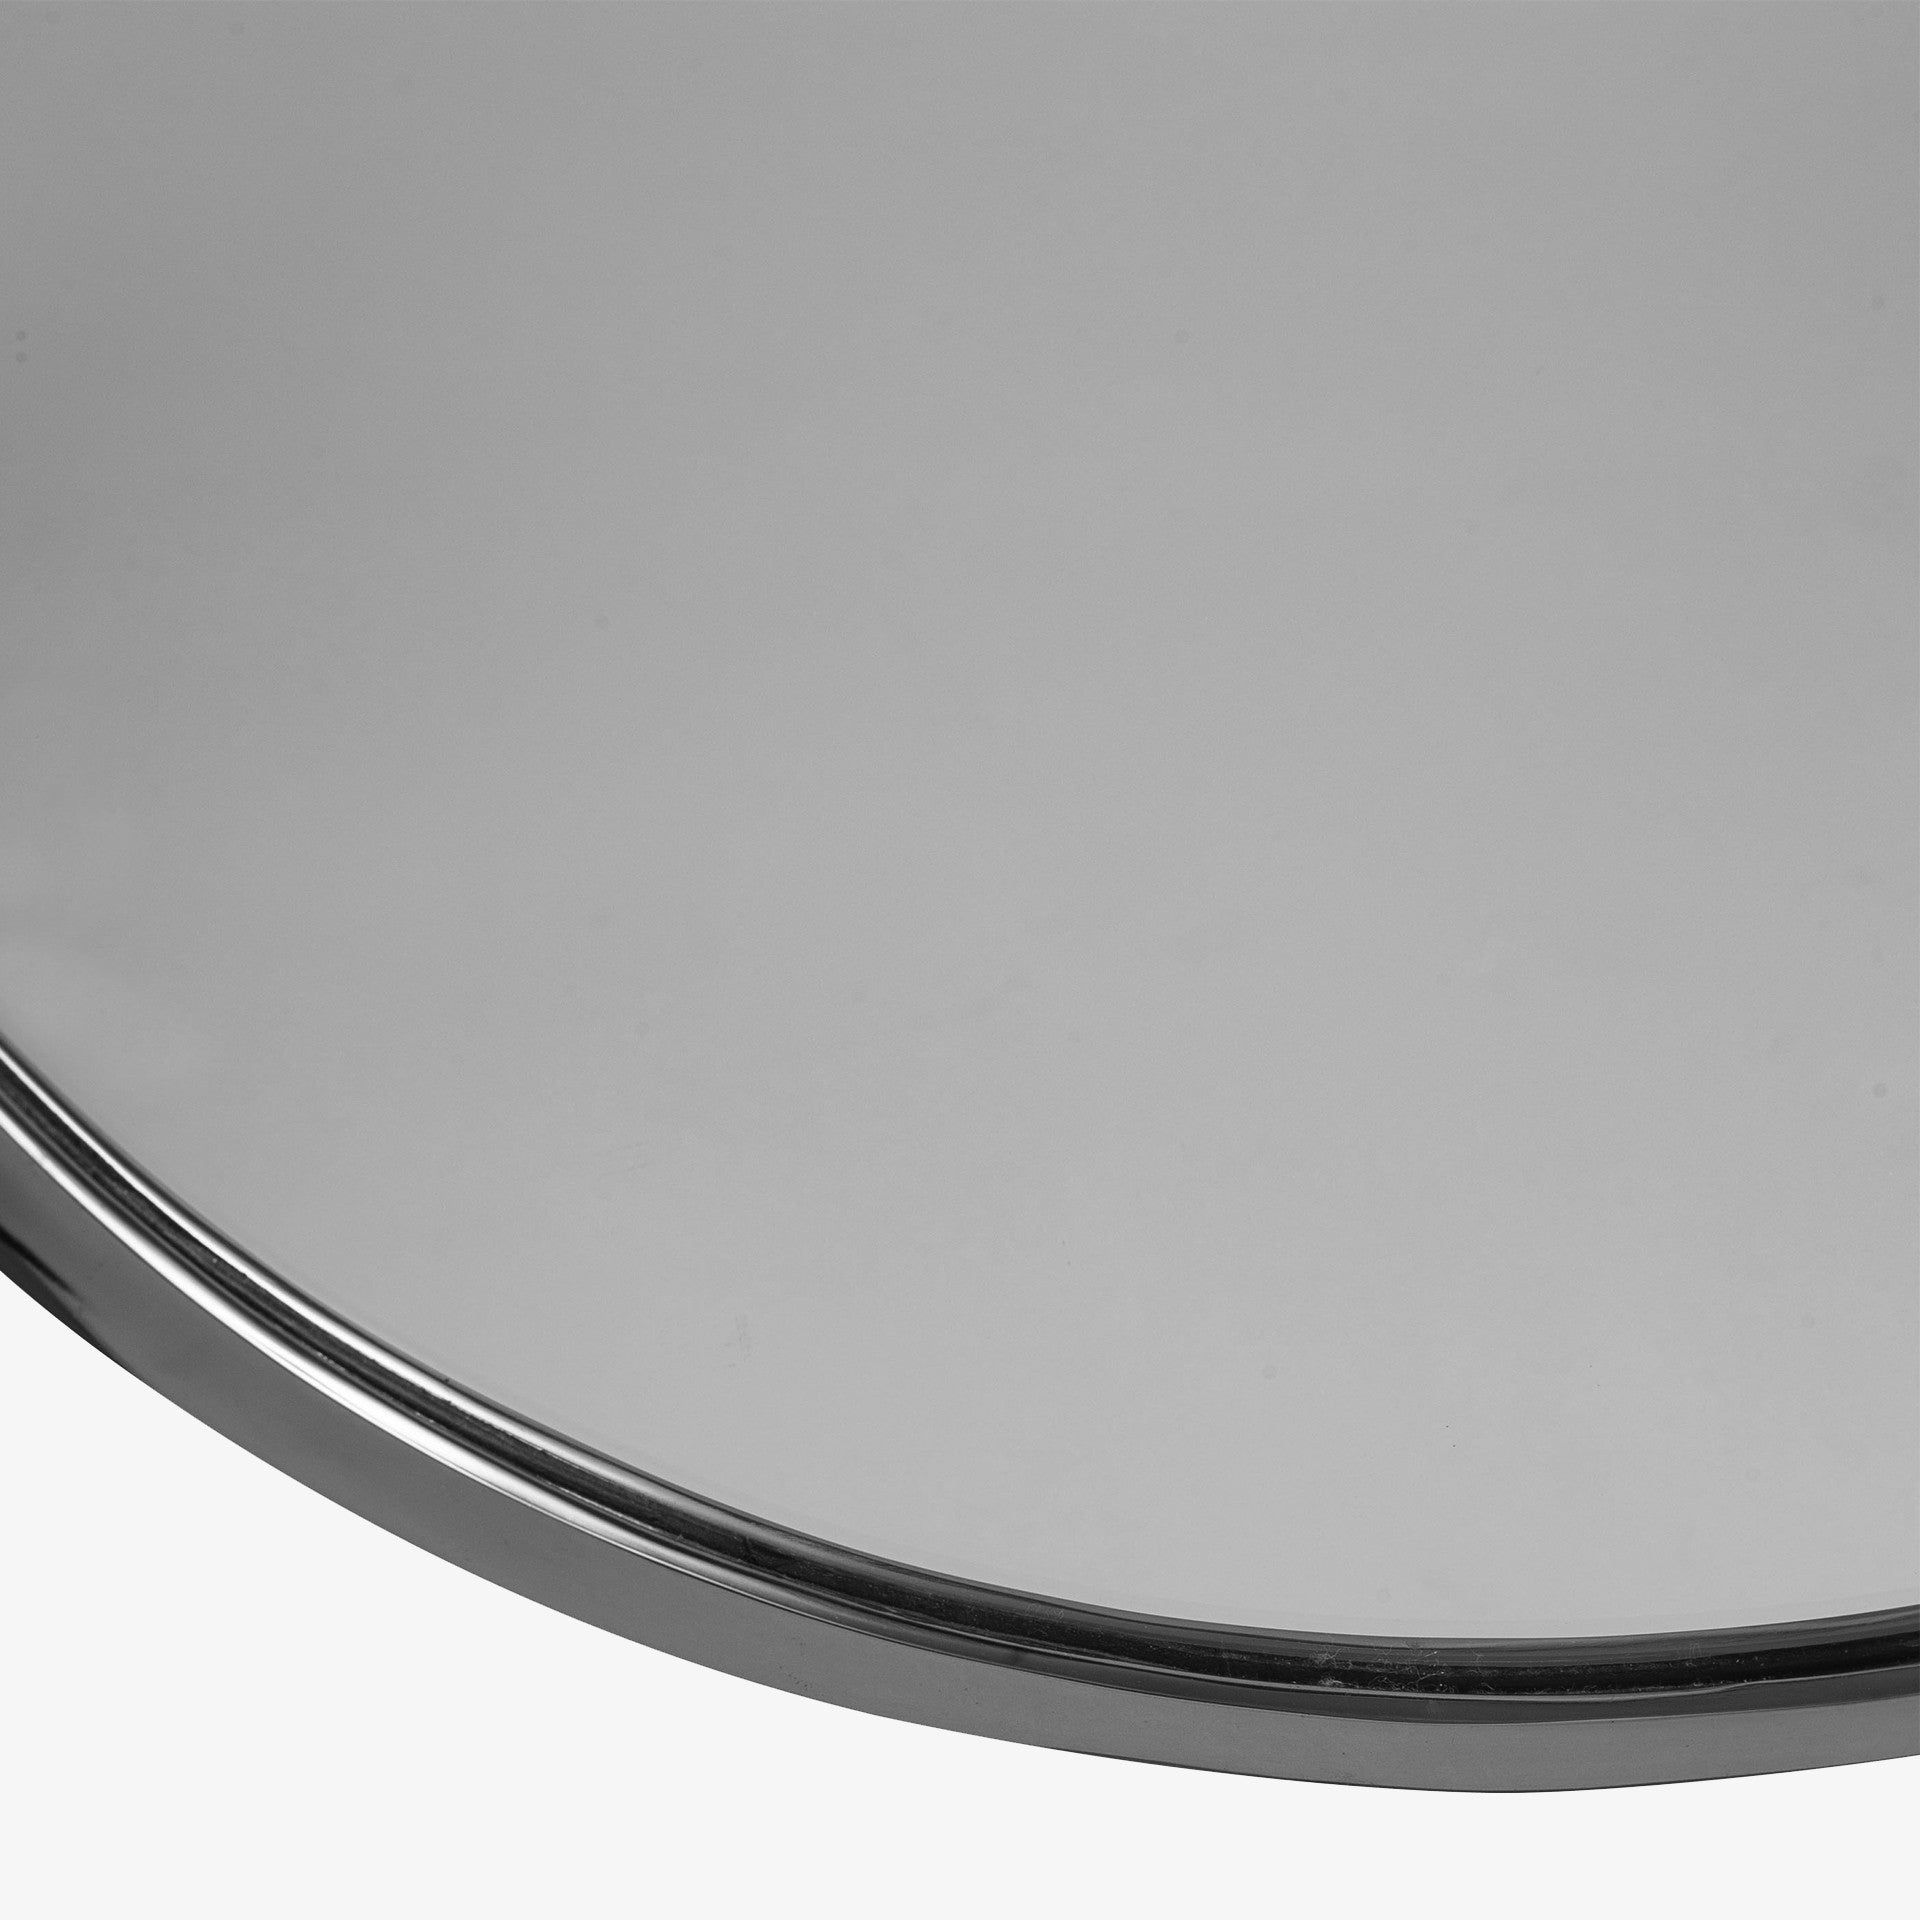 Silver Metal Round Wall Mirror